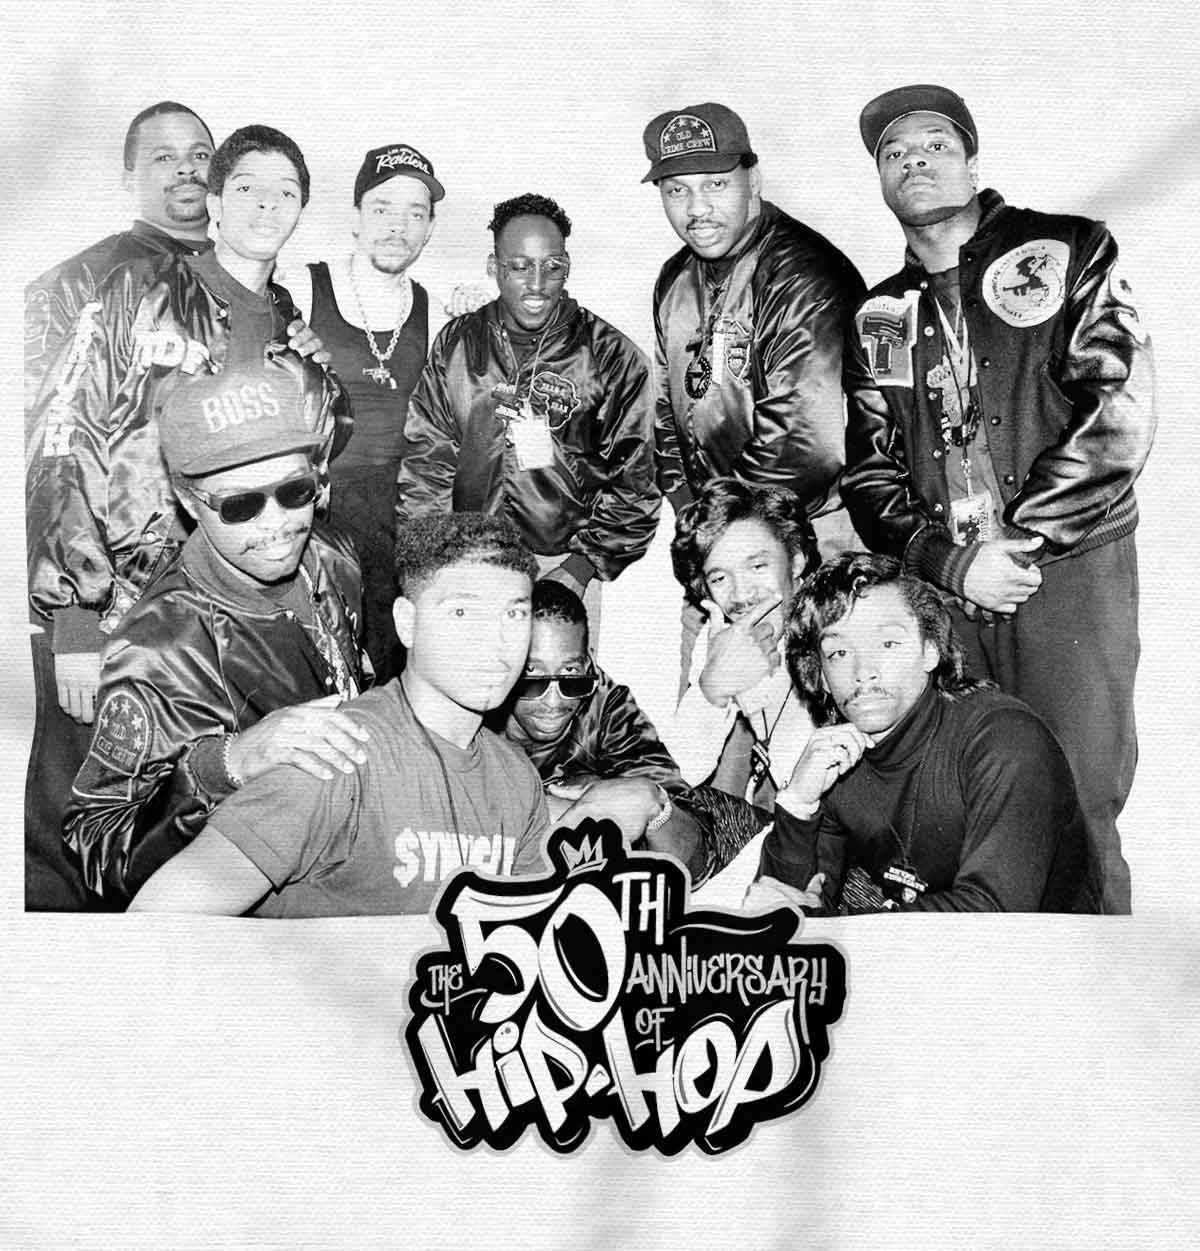 This image showcases a powerful visual narrative of a historical moment captured. It features Ice T and his Rhythm Syndicate crew representing the foundation of hip-hop culture.